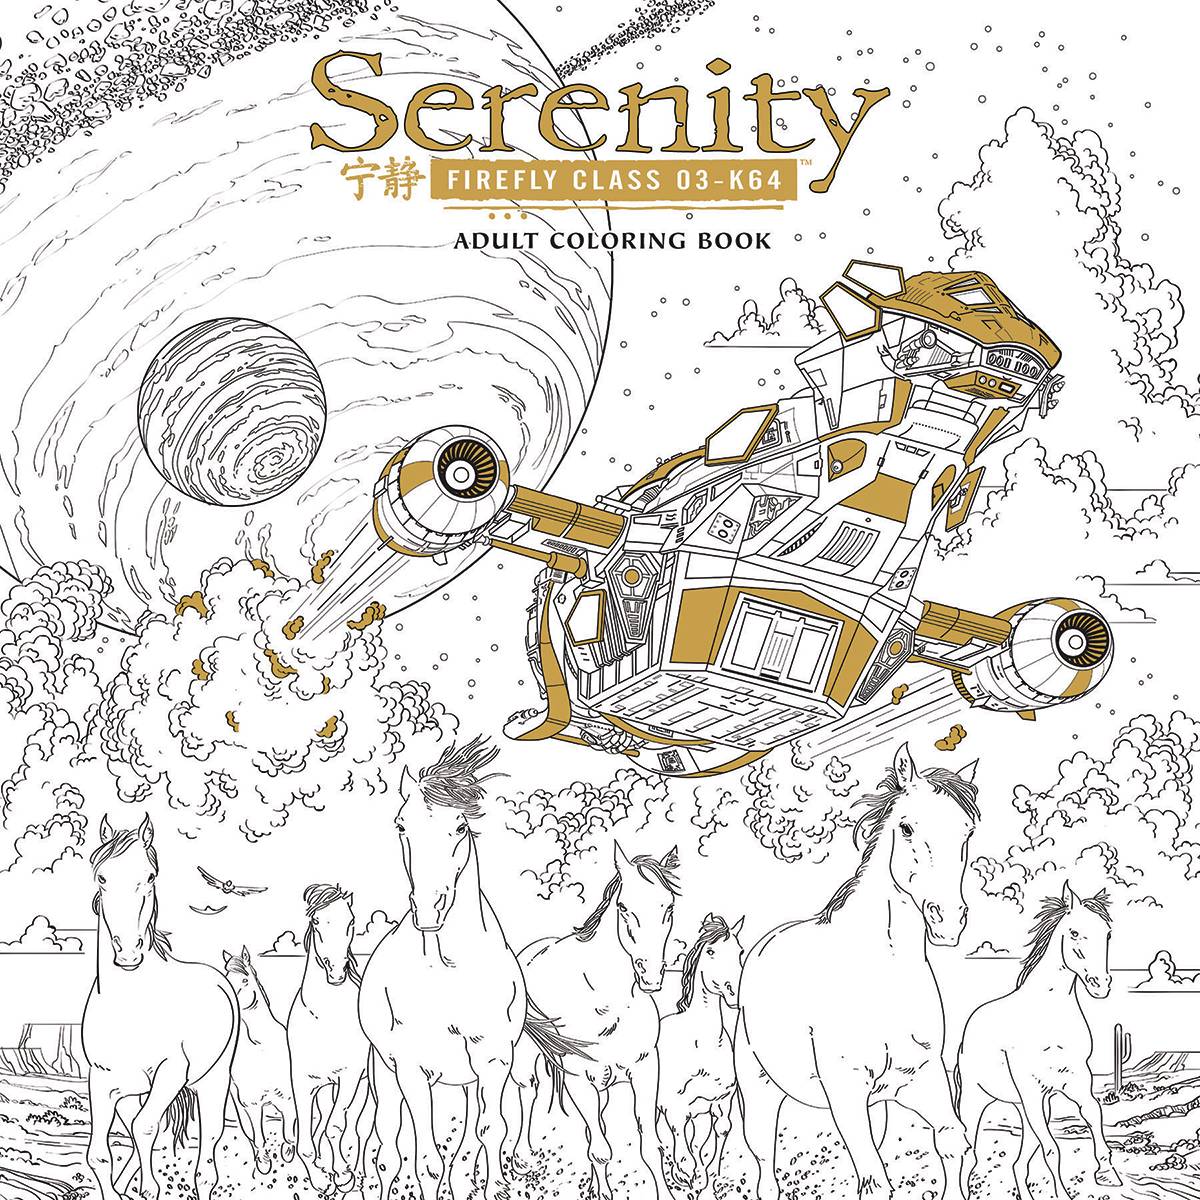 Serenity Adult Coloring Book Graphic Novel